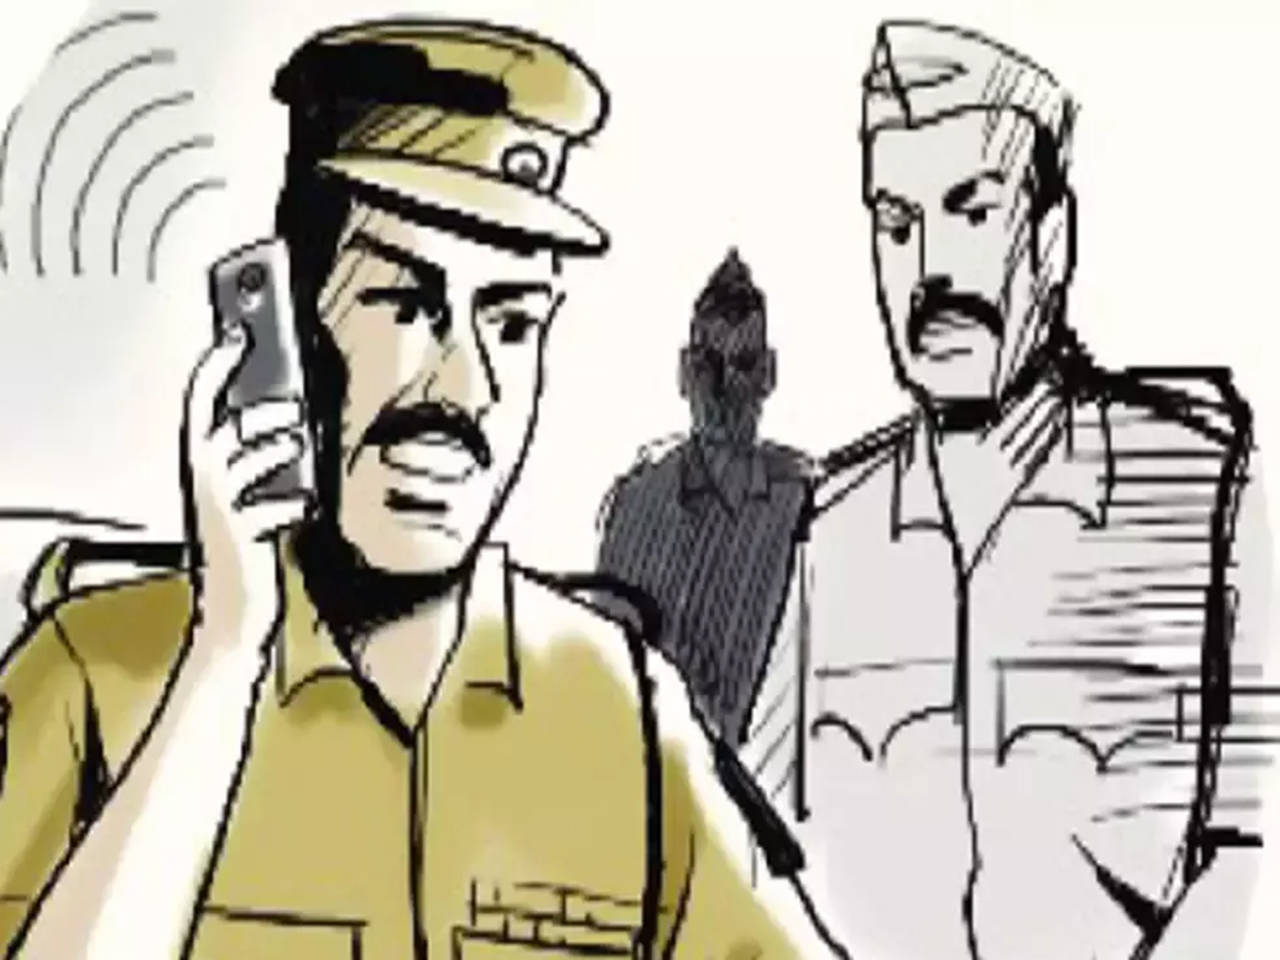 Sarpanch, aide booked for raping woman | Jaipur News - Times of India